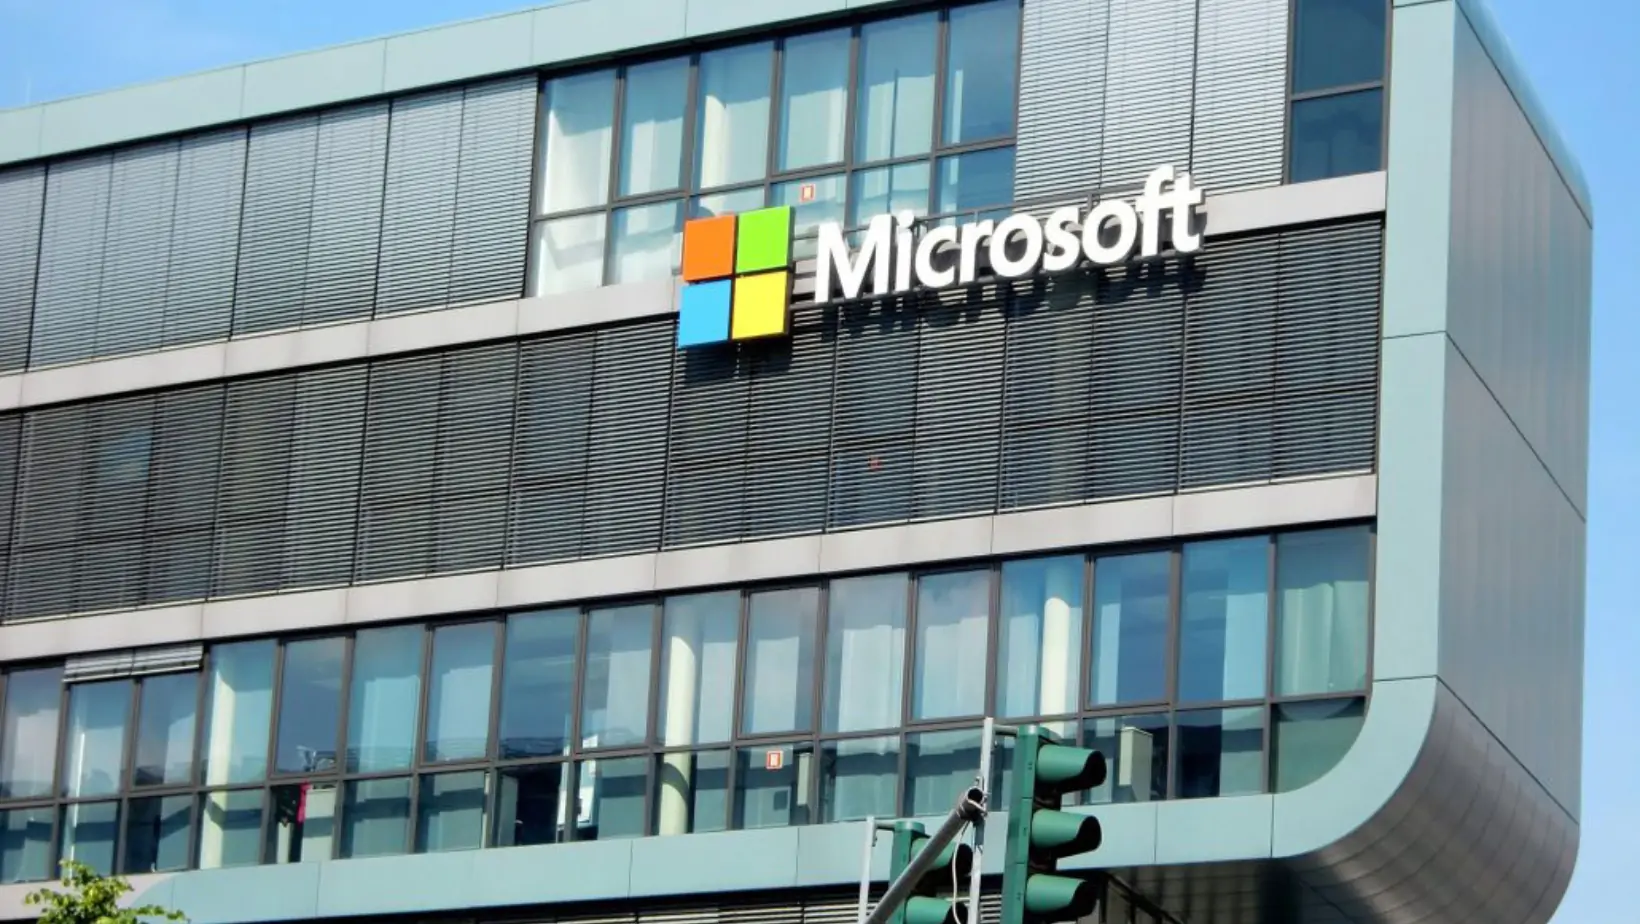 Microsoft Posts Strong Q2 Fiscal Results with Revenue Up 18%